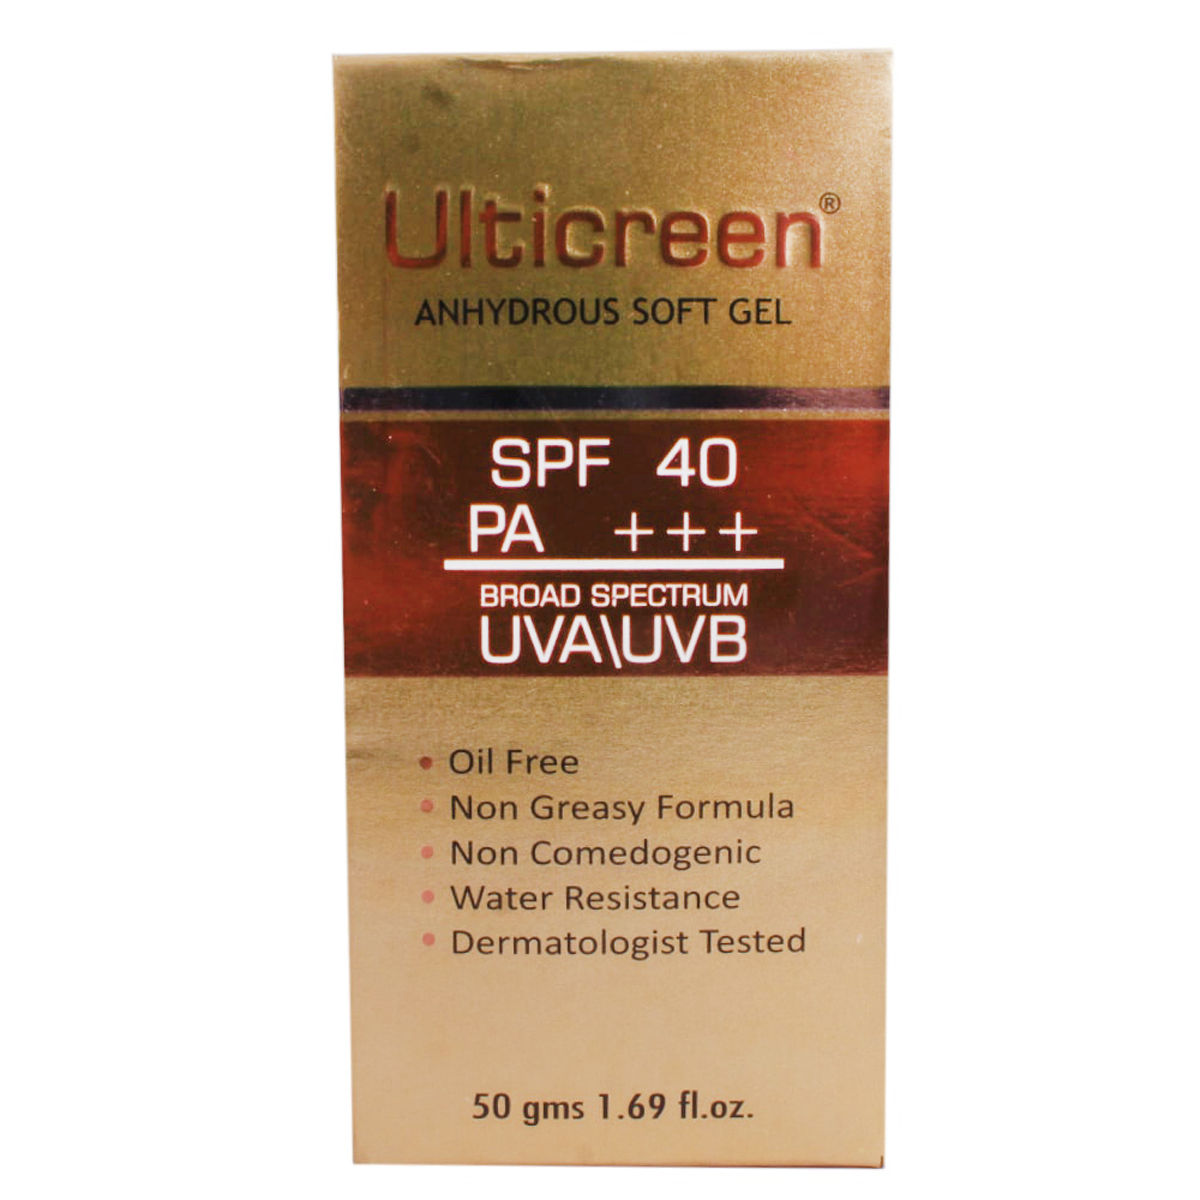 Ulticreen SPF 40 PA+++ Gel 50 gm, Pack of 1 